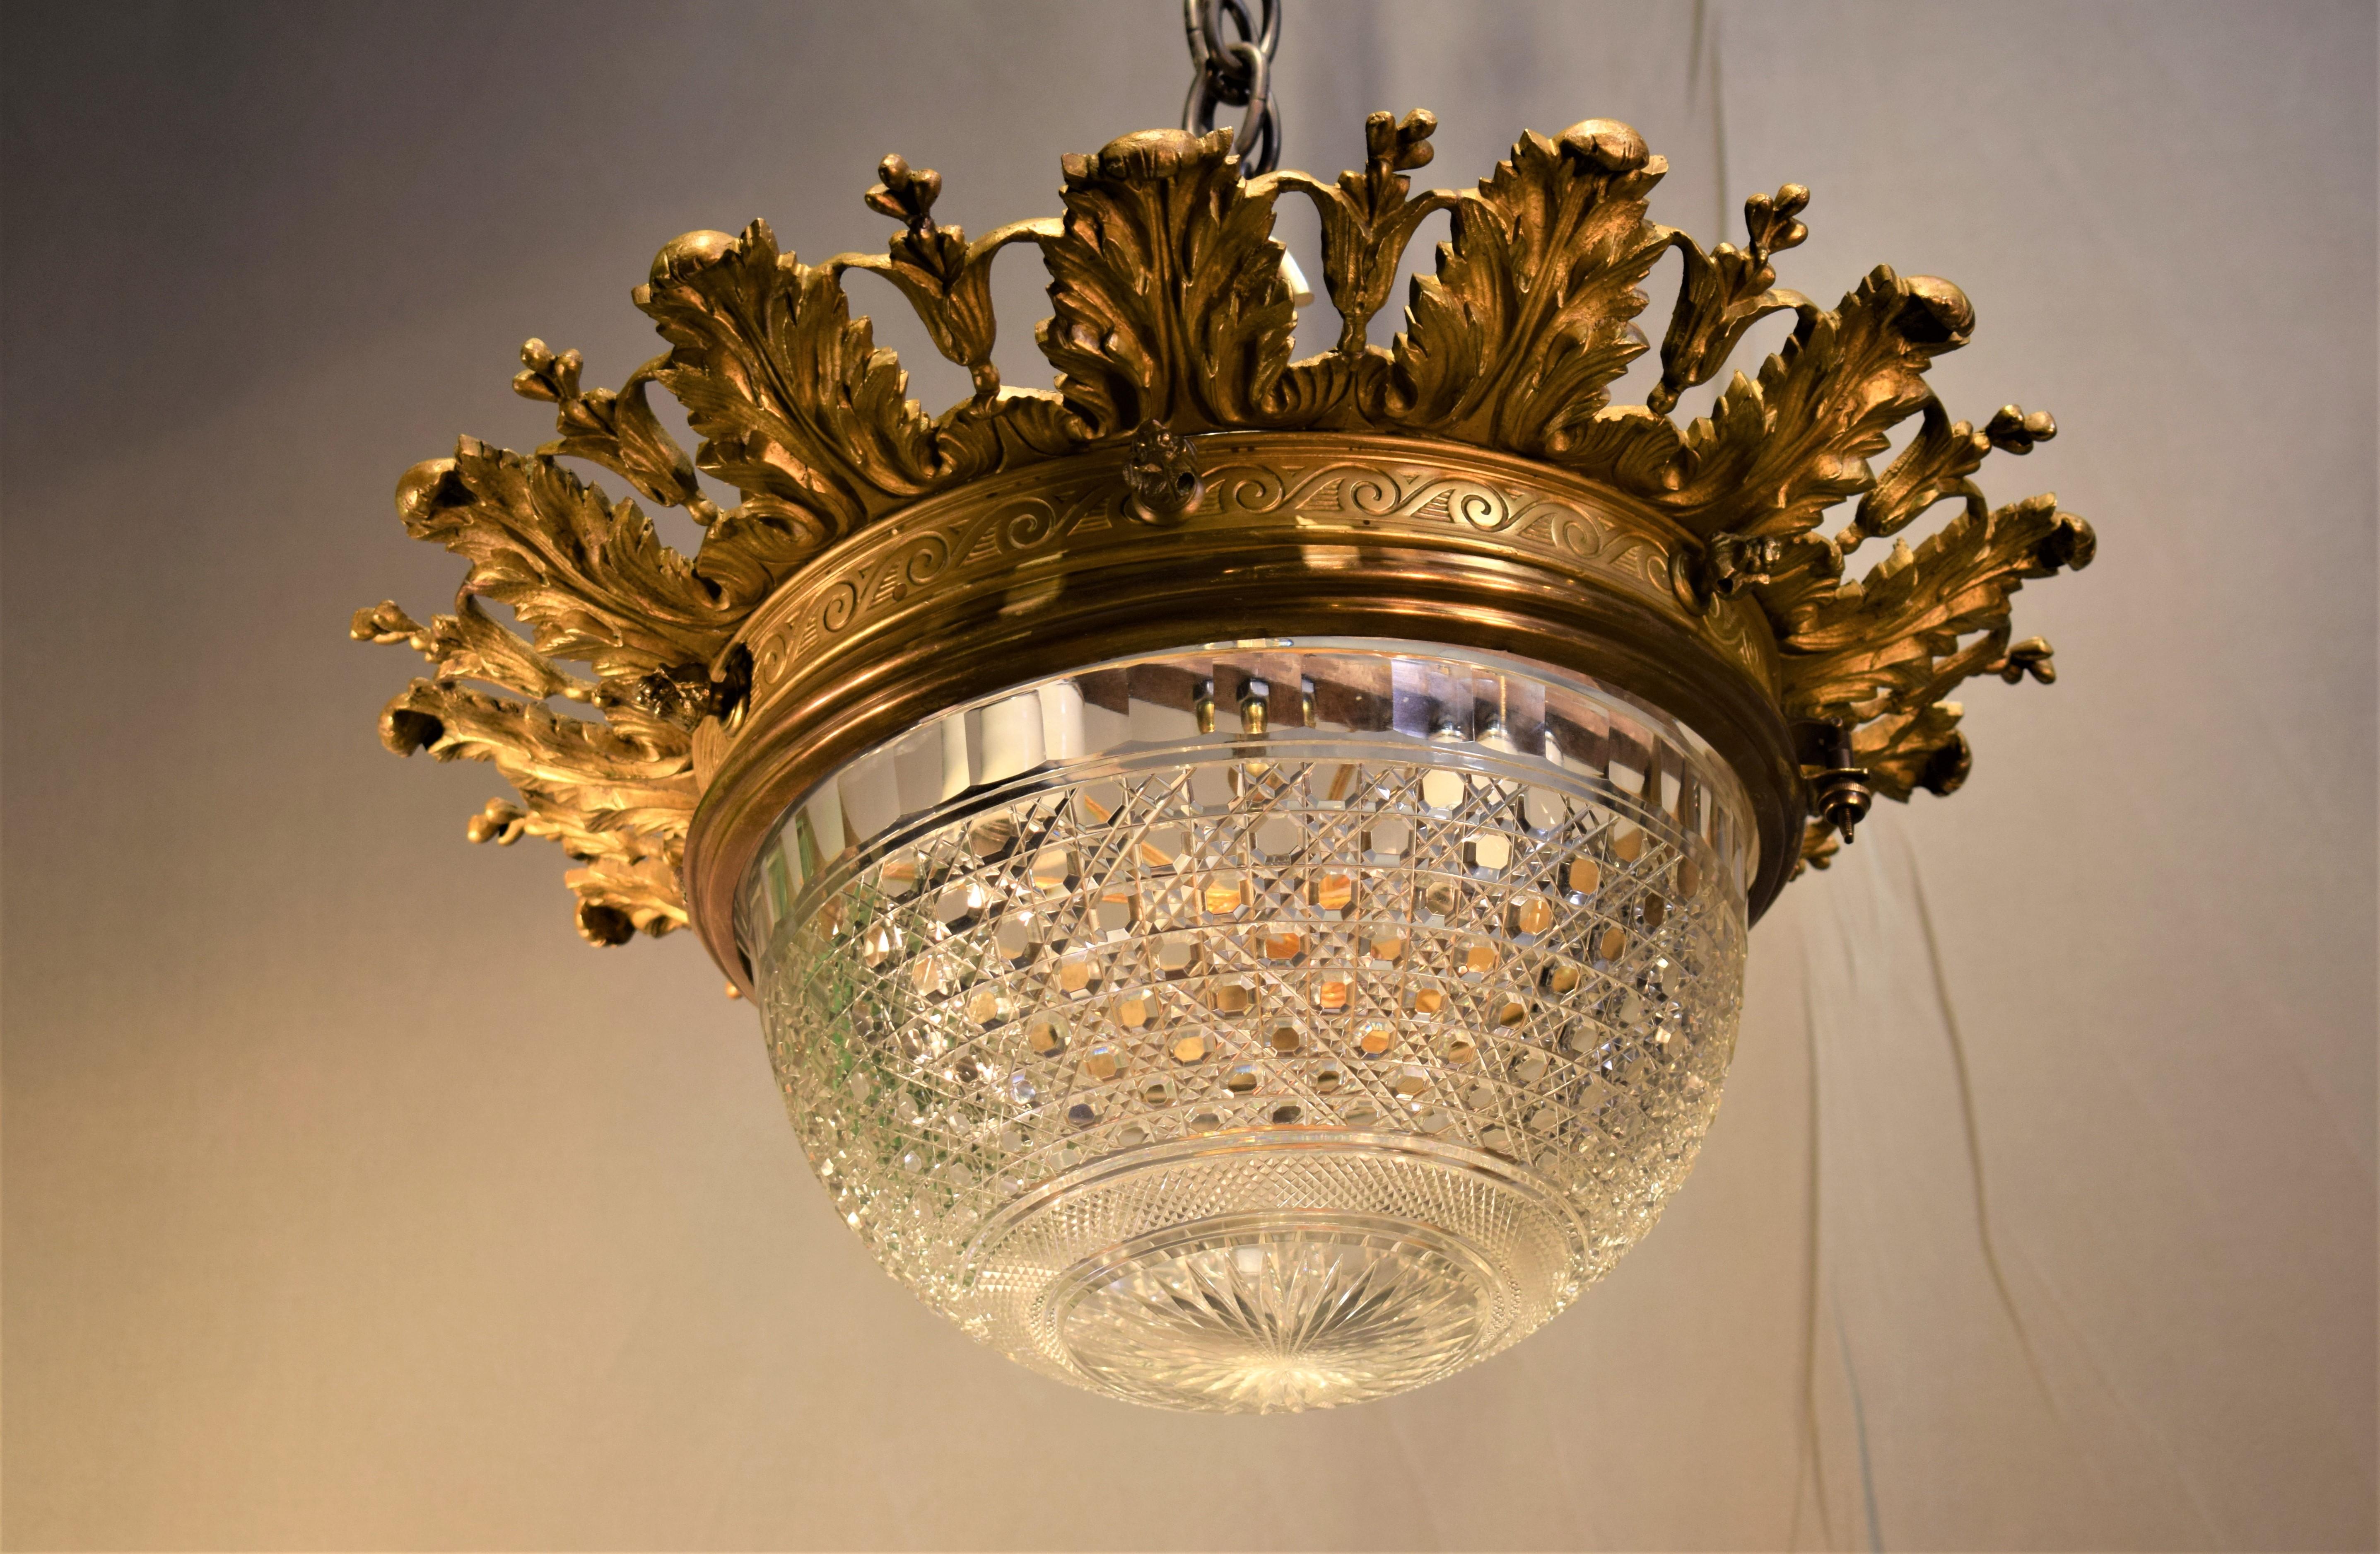 A very dine gilt bronze pendant with handcut crystal dome by Baccarat, France, circa 1920. 2 lights.
Dimensions: Height 9